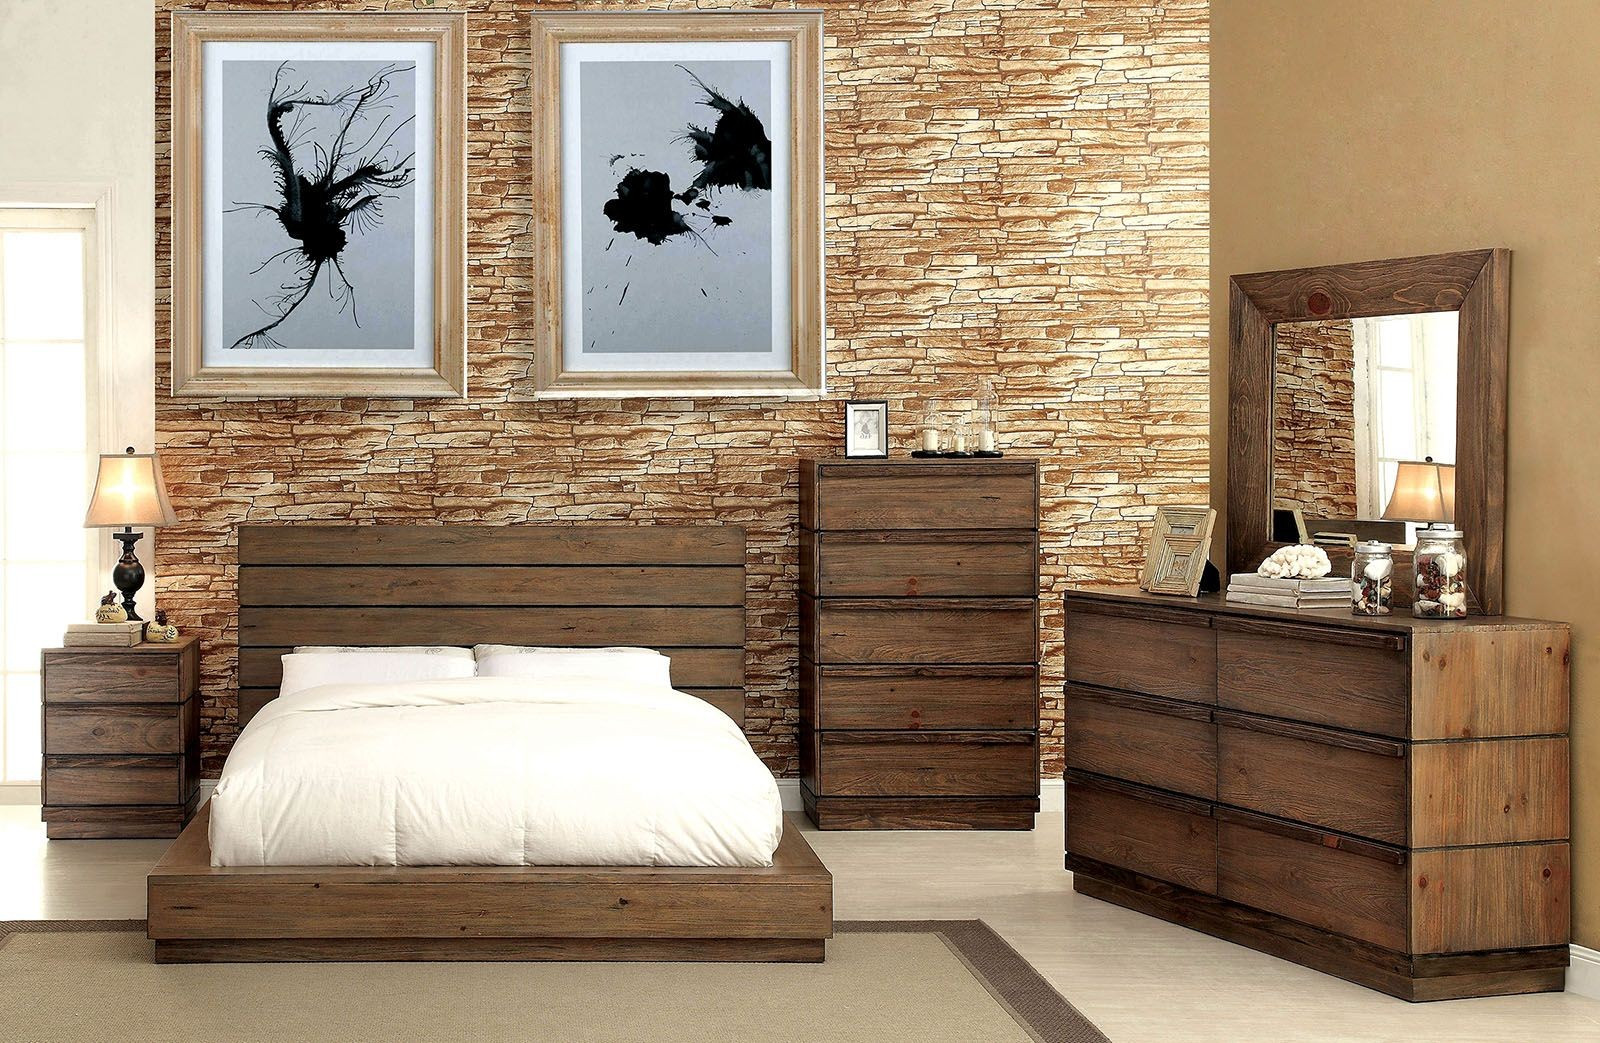 Cheap Rustic Bedroom Furniture Sets
 Coimbra Rustic Natural Bedroom Set from Furniture of